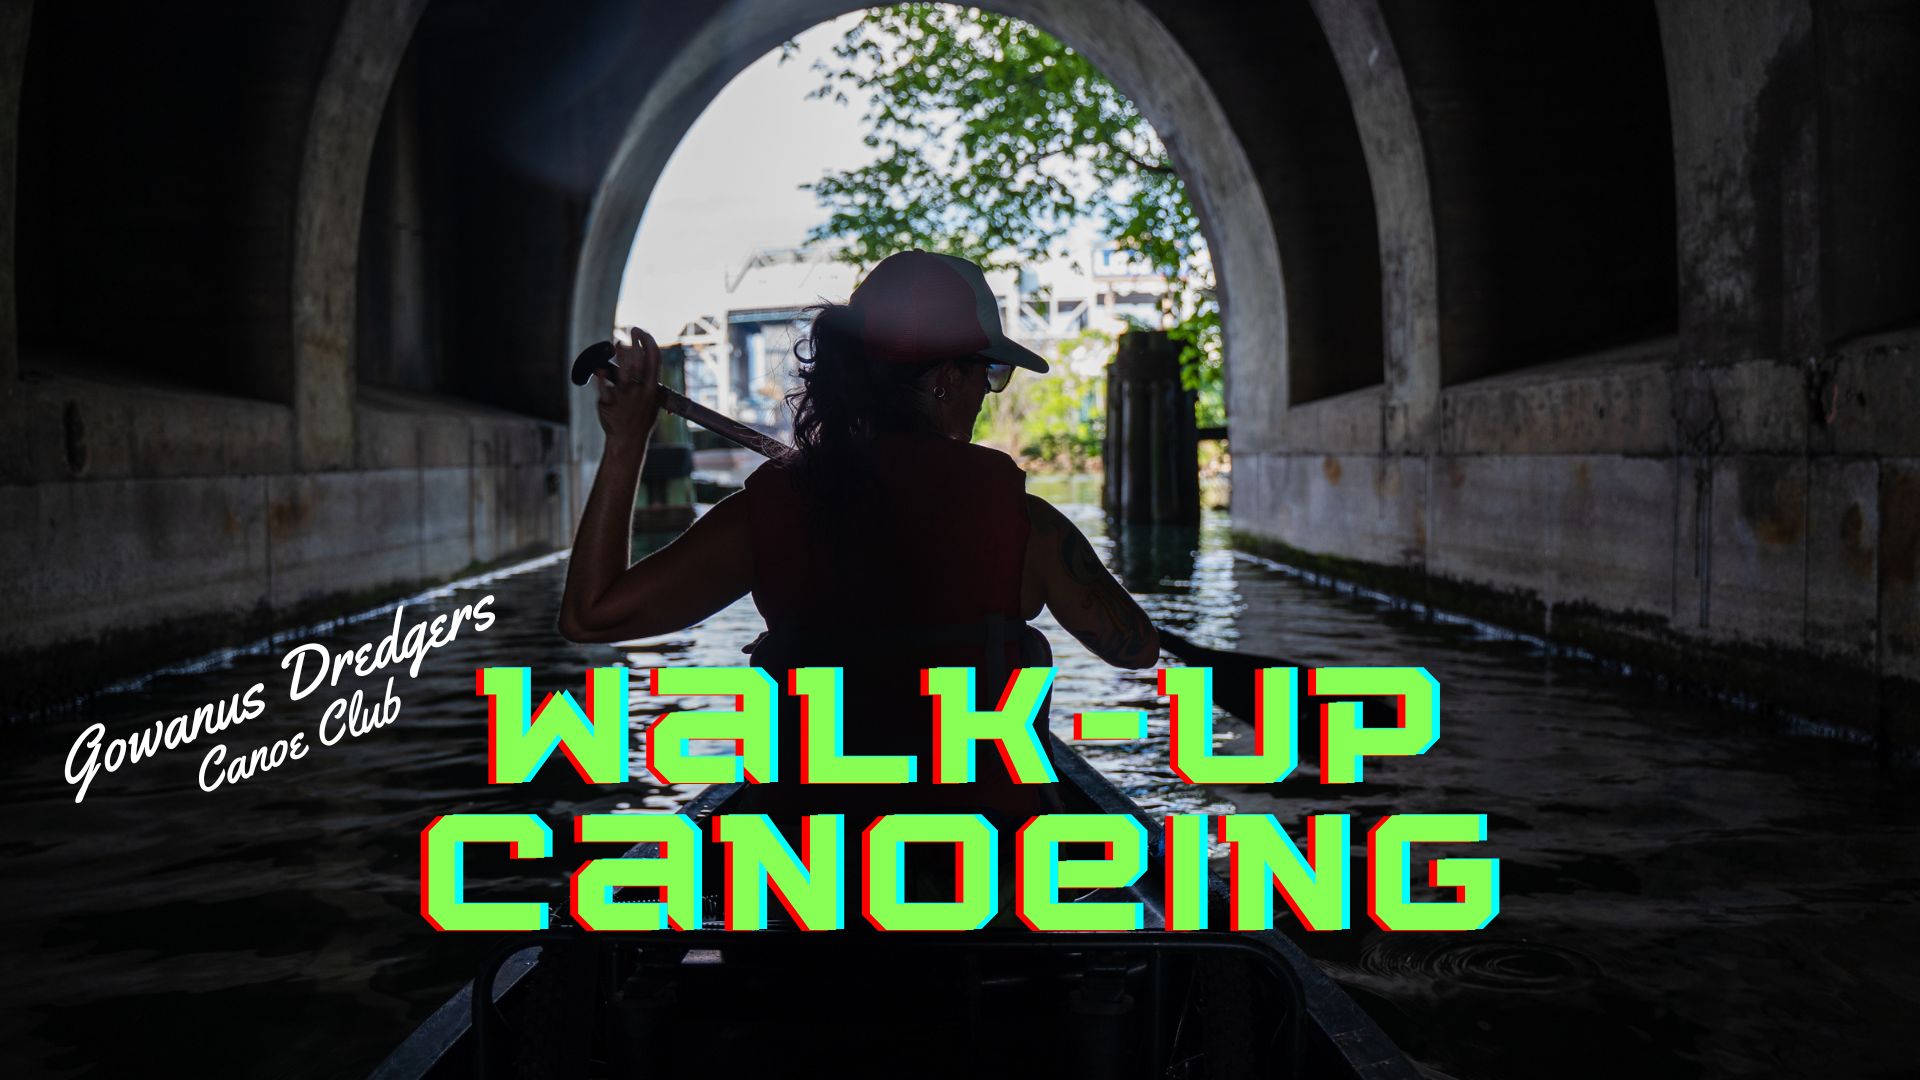 A woman sits in a canoe in a tunnel. The text "Walk-up canoeing" is in green below her.